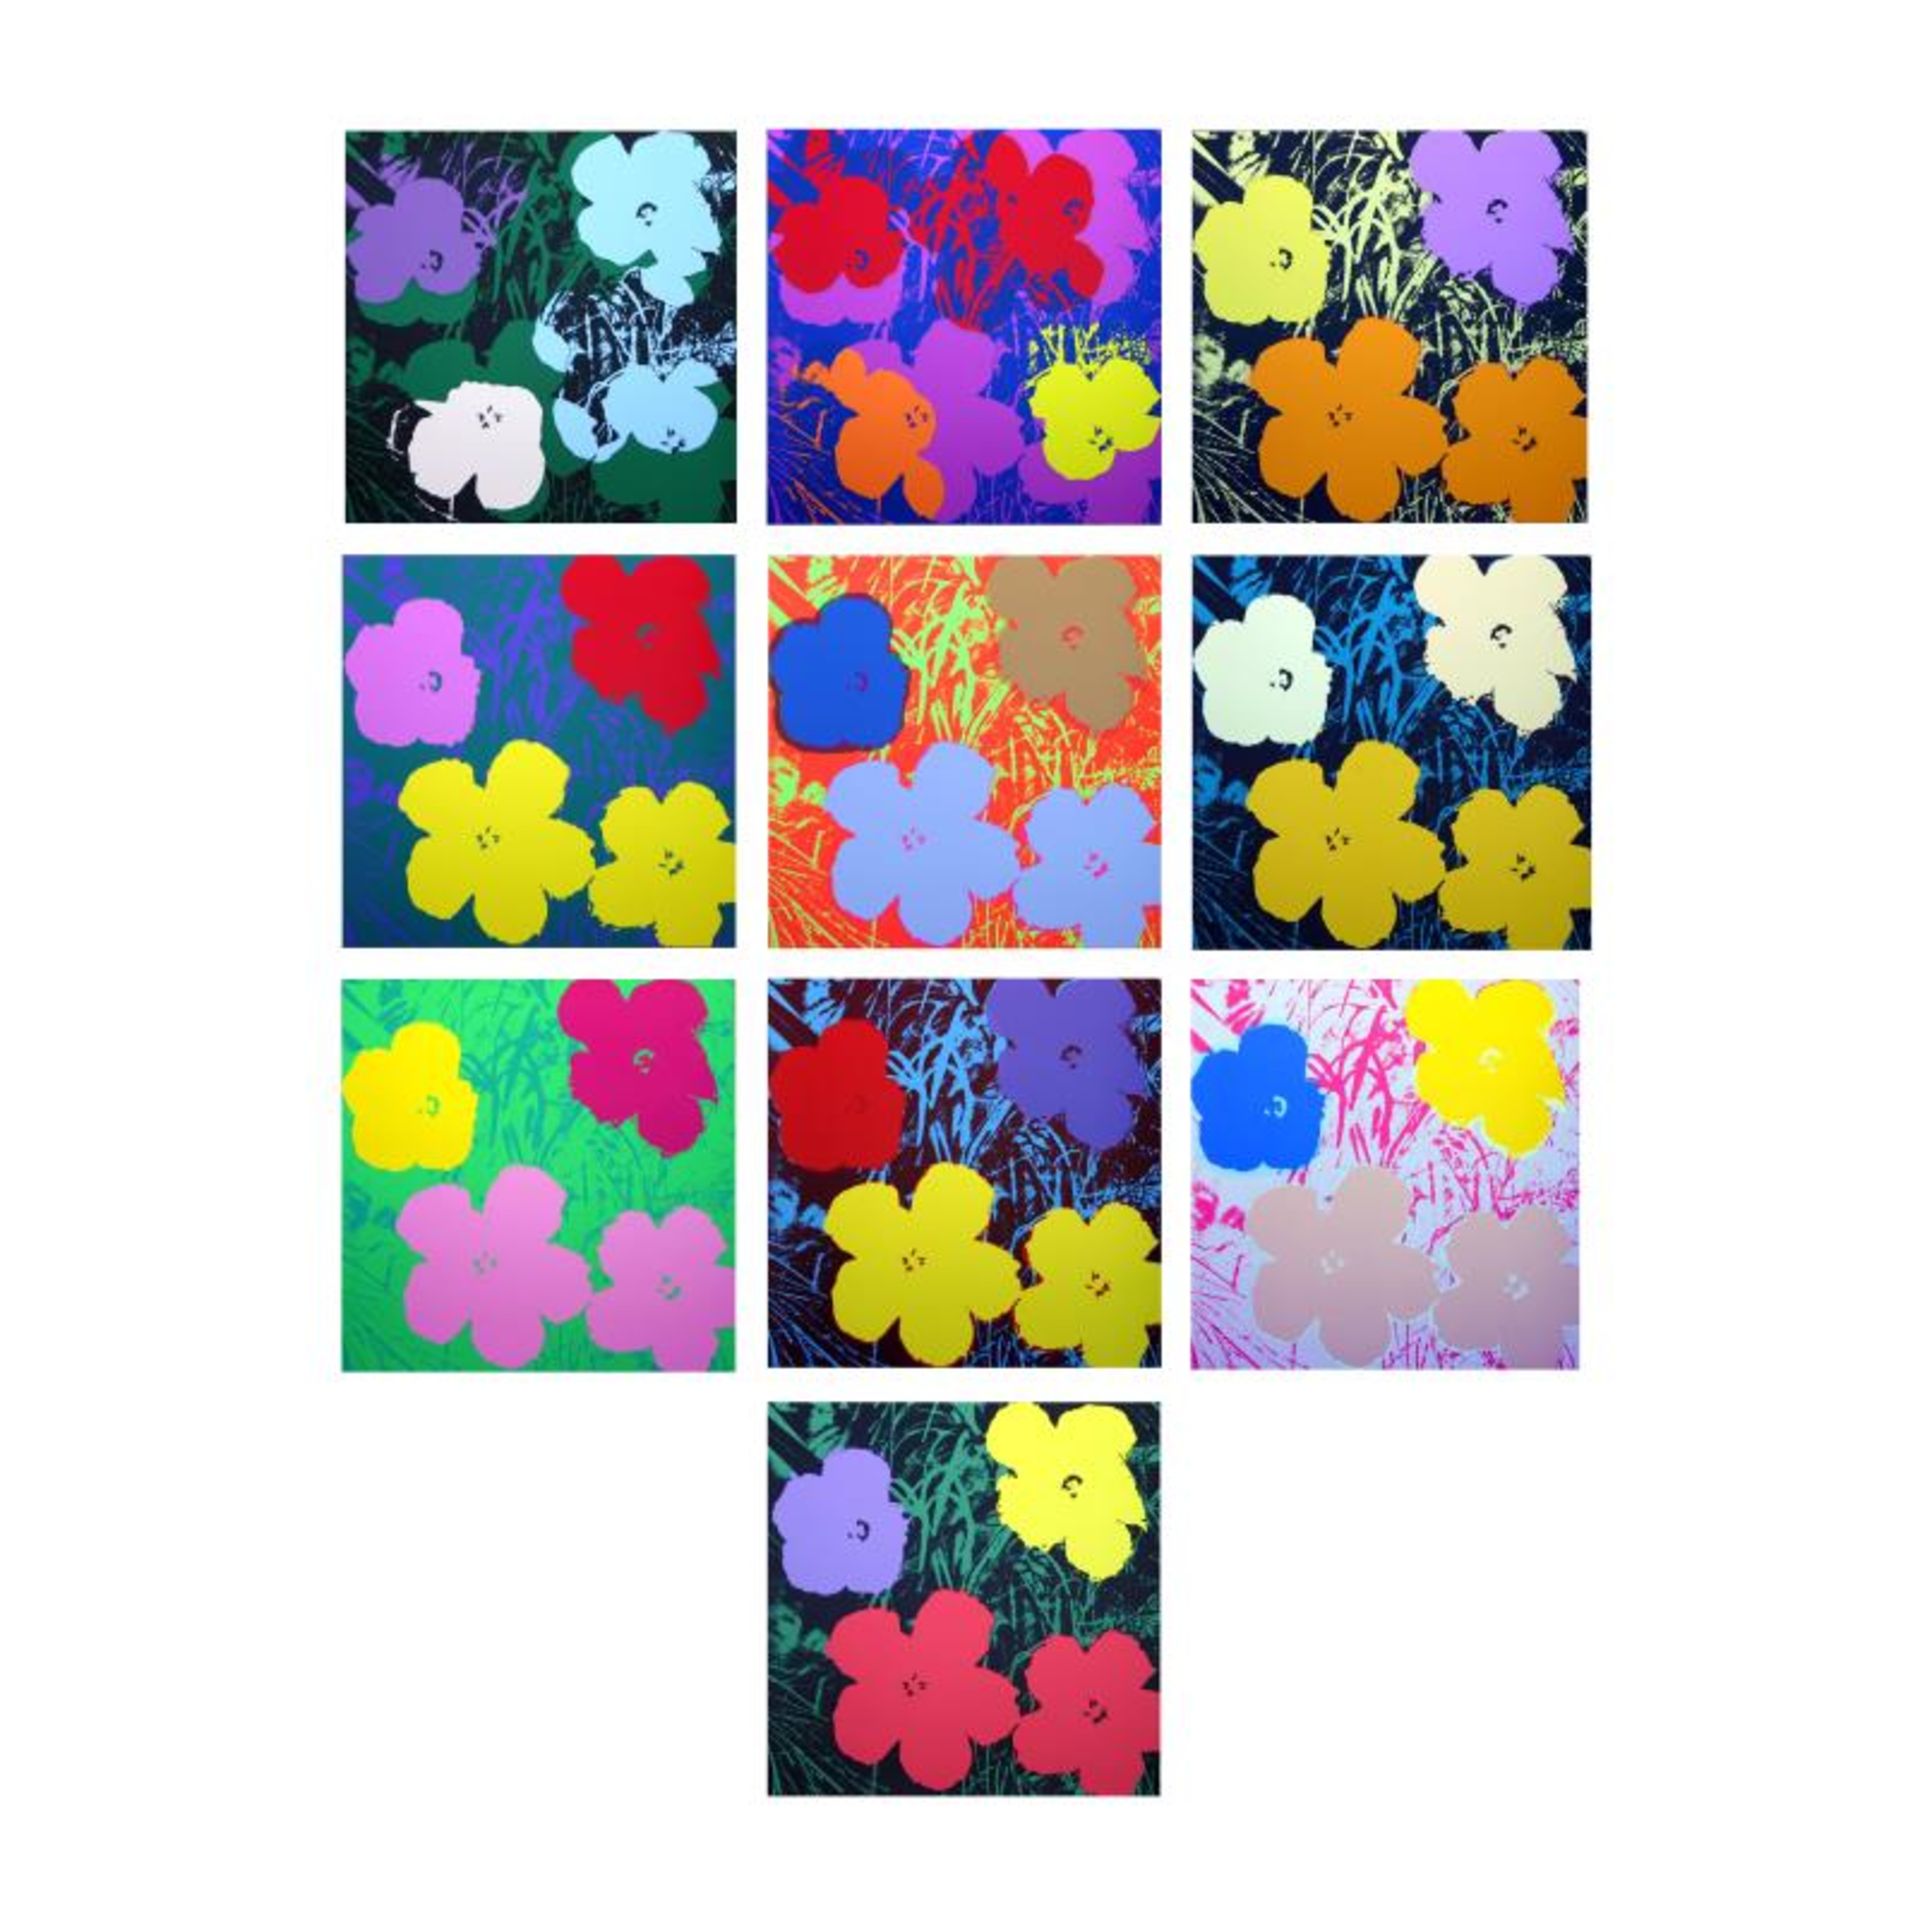 Andy Warhol "Flowers Portfolio" Suite of 10 Silk Screen Prints from Sunday B Mor